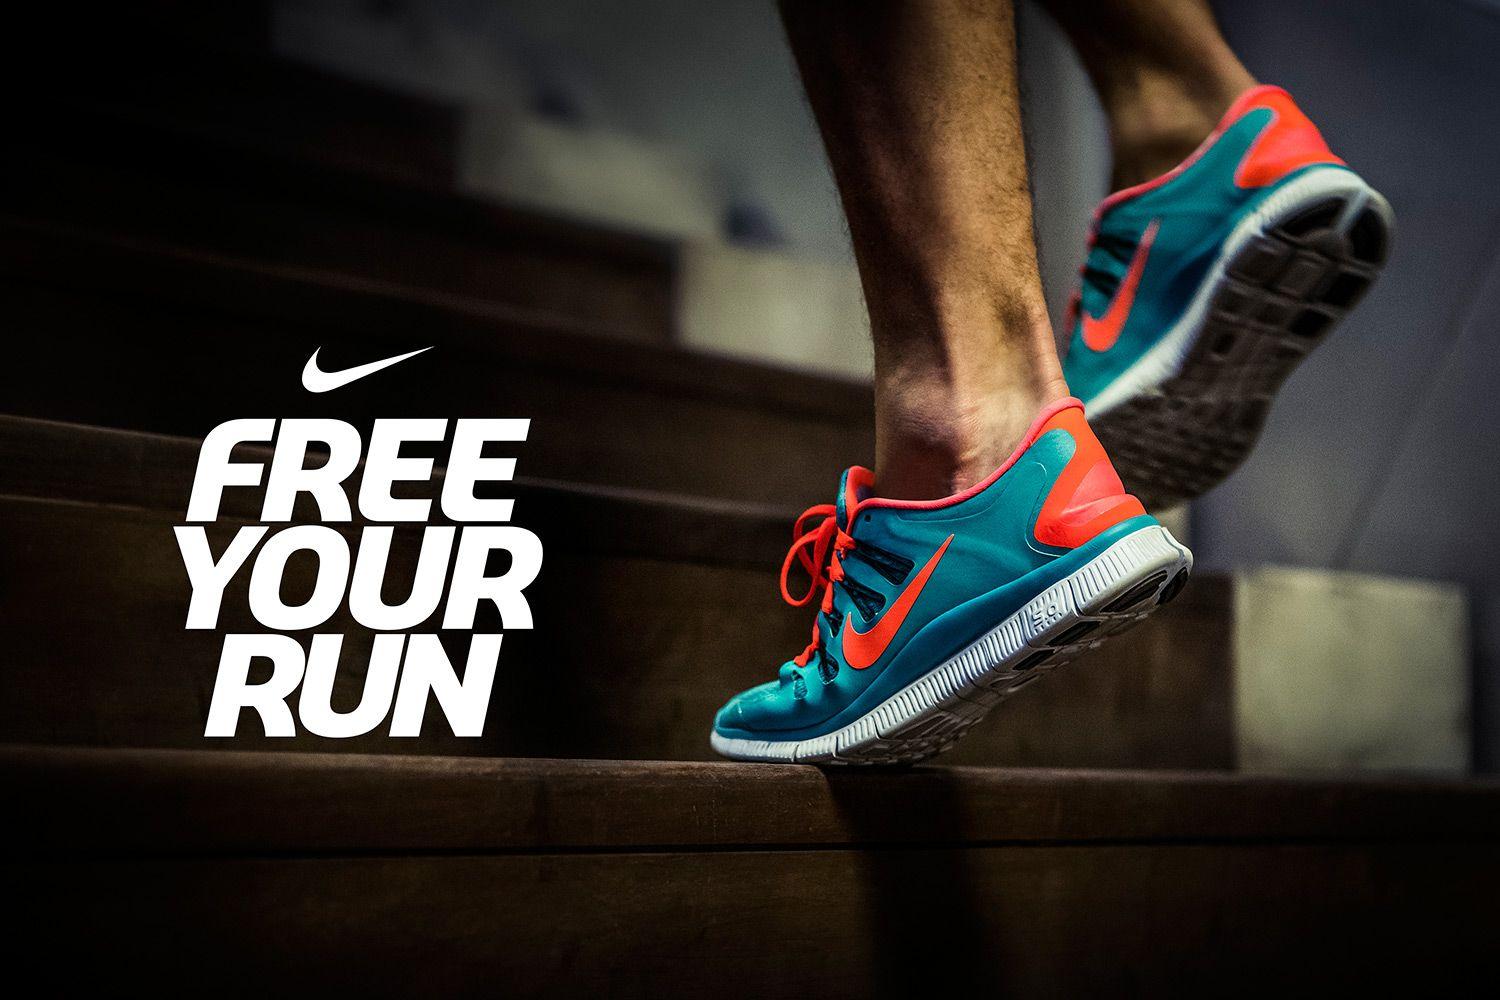 HD Nike Running Wallpaper and Photo. HD Products Wallpaper